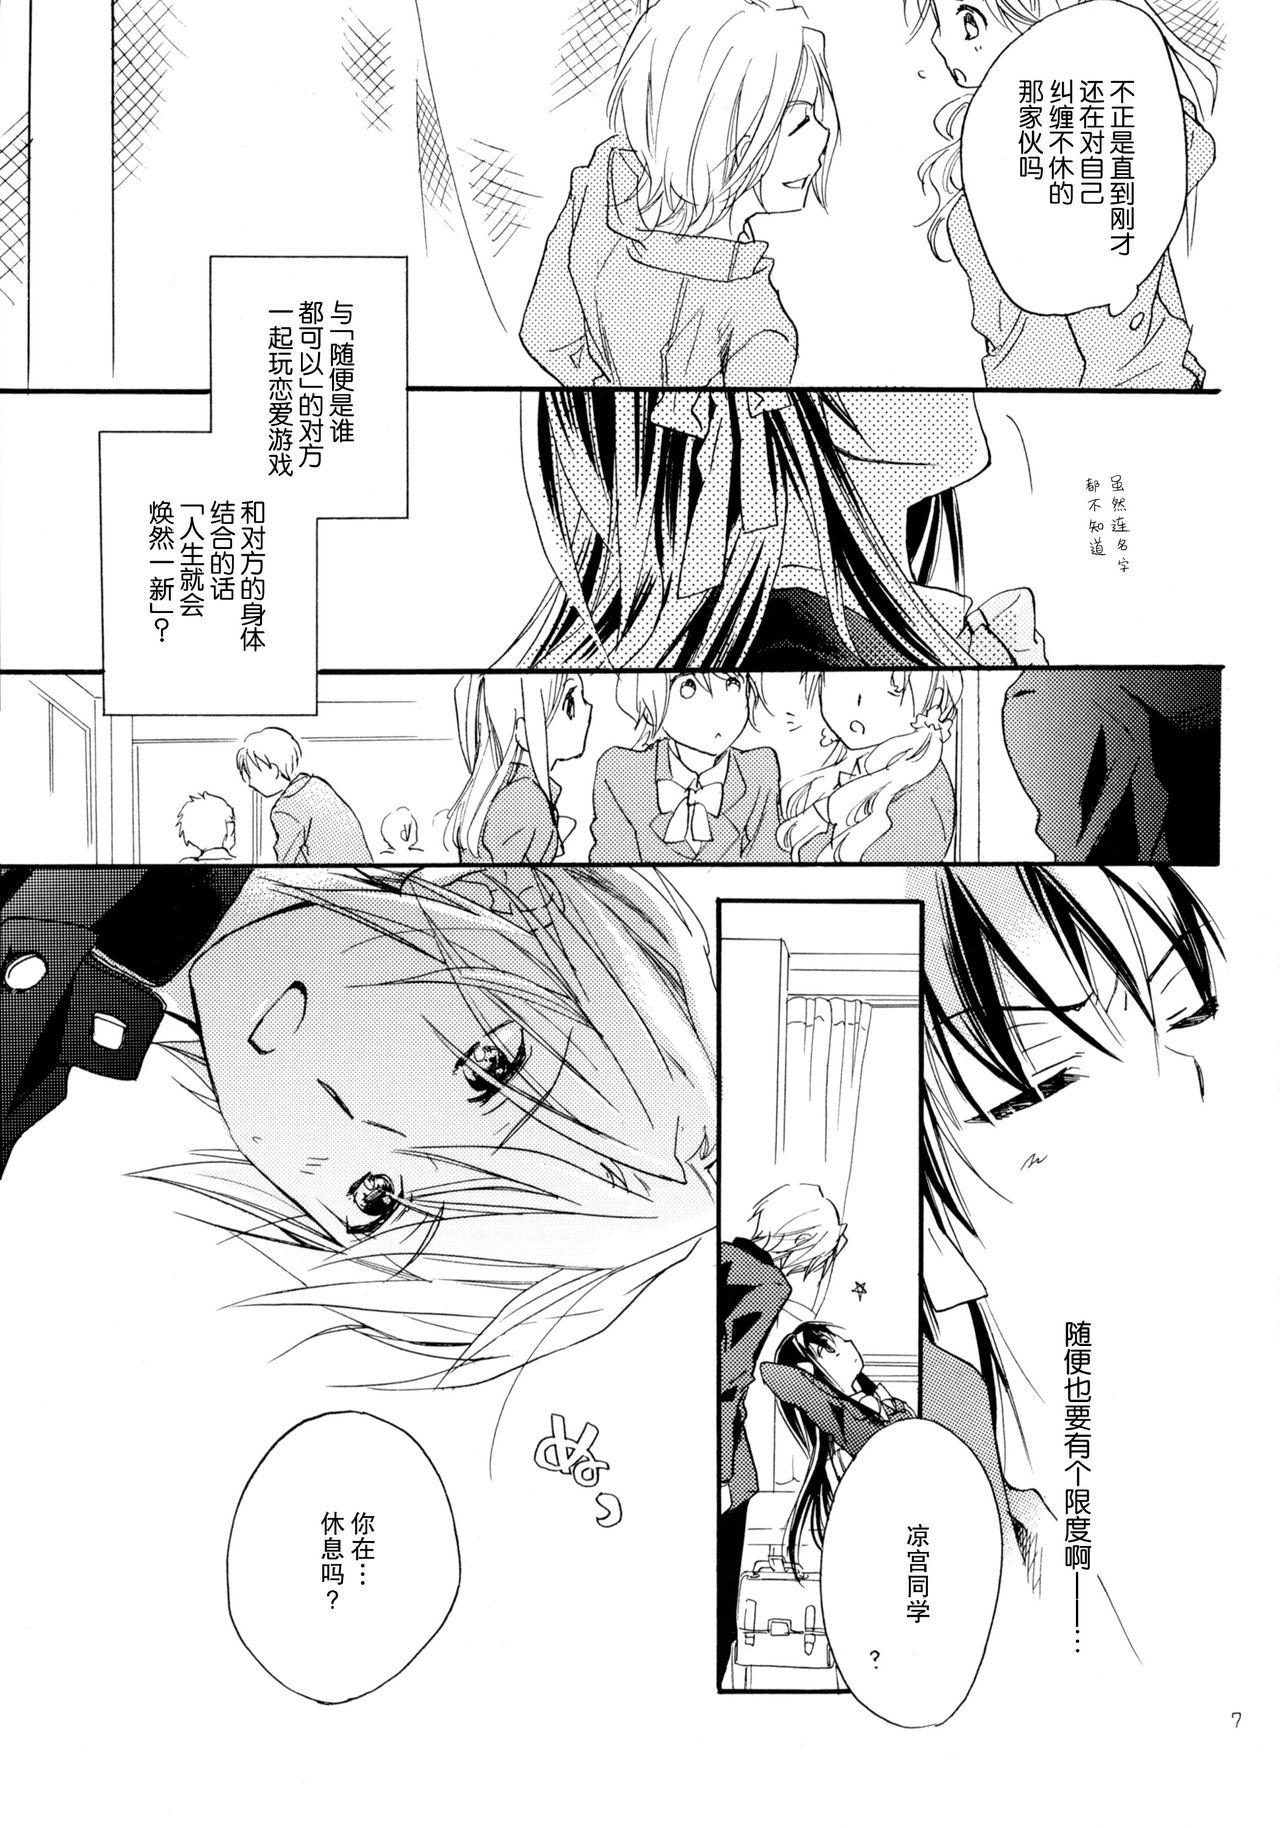 Parties Star way to Heaven - The melancholy of haruhi suzumiya Gostosas - Page 8